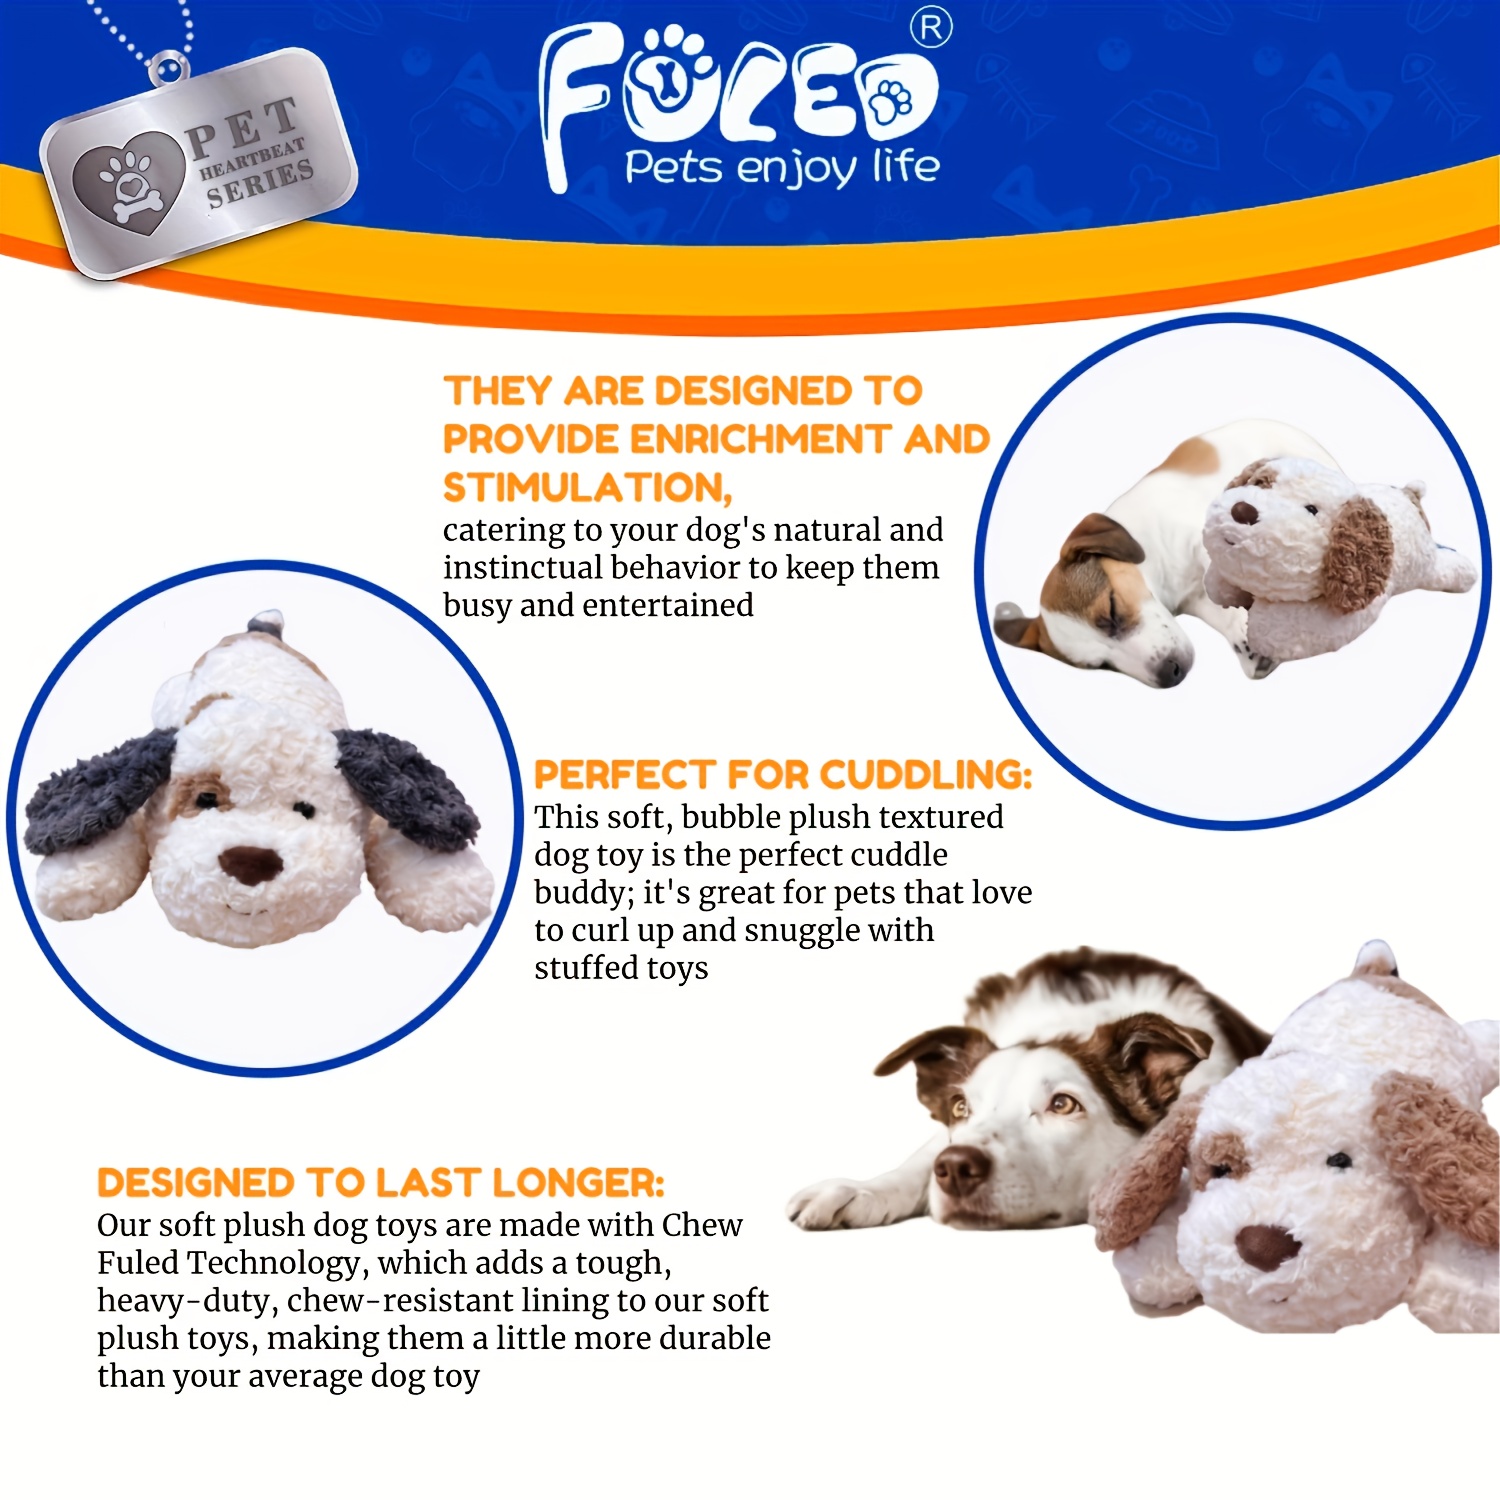 Dog Teething Toys for Puppies - Squeaky Plush for Puppies to Keep Them Busy,  Anxiety Relief. Dog